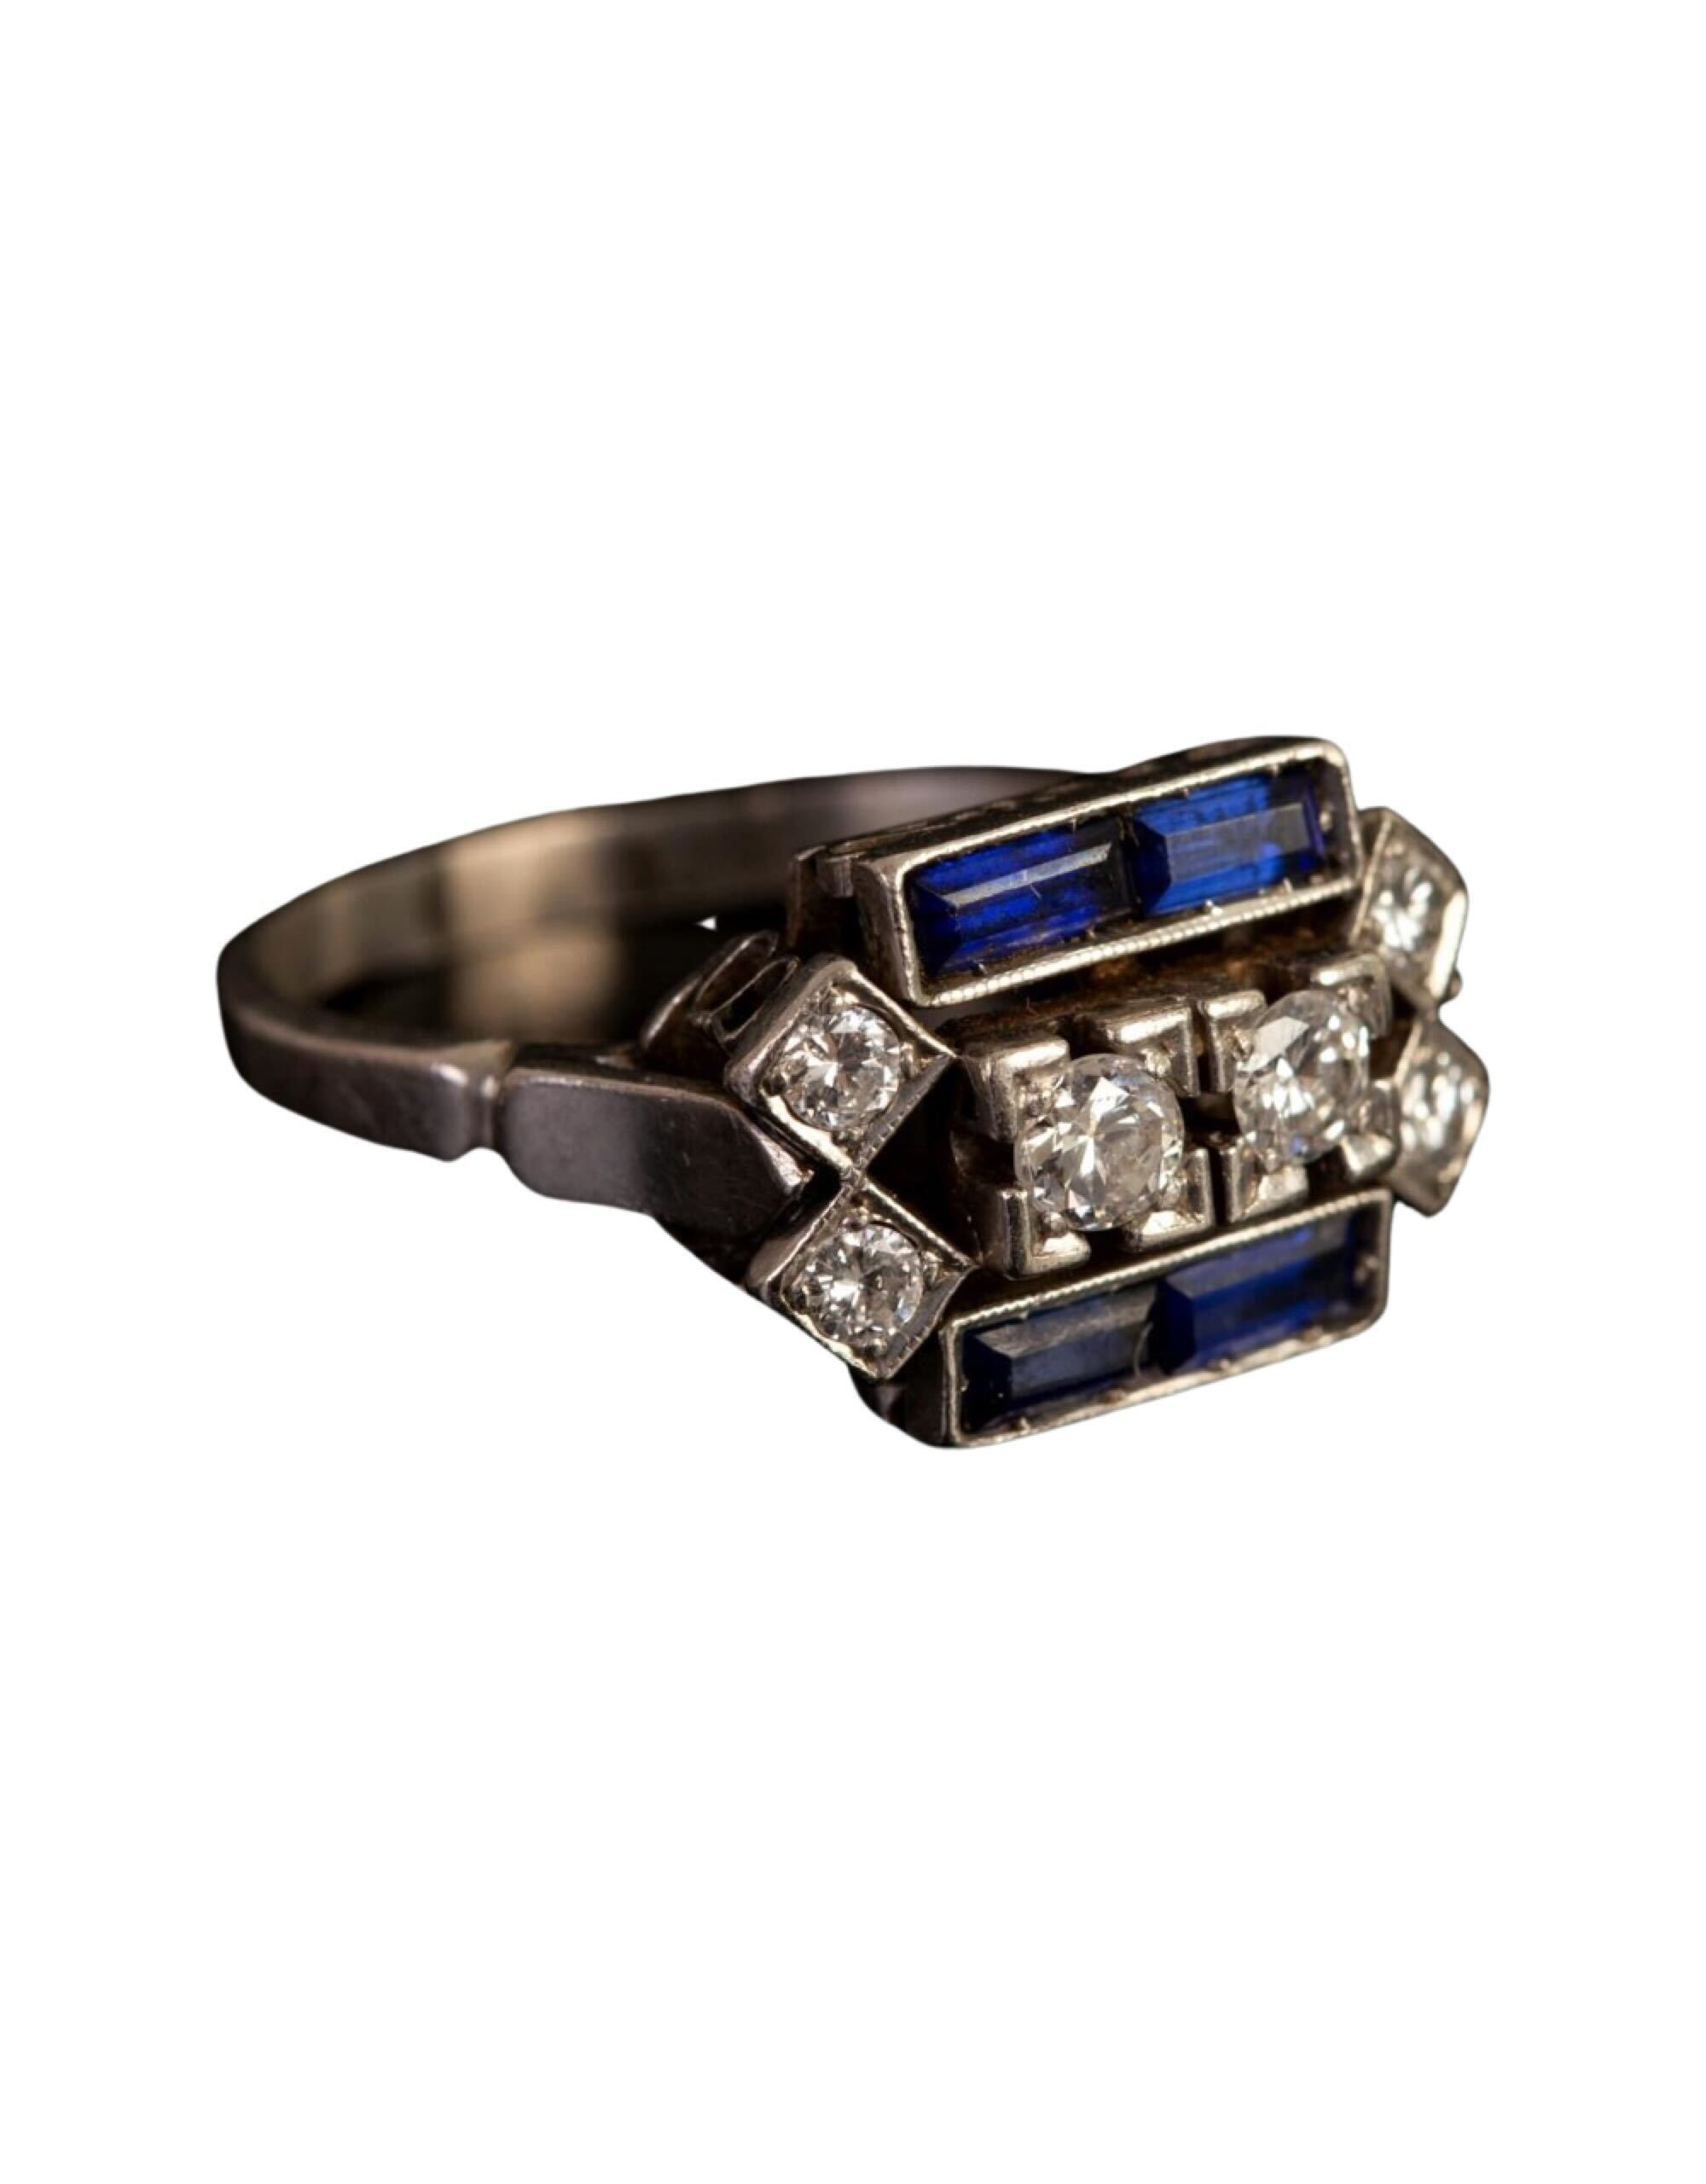 Art déco diamond and sapphire ring